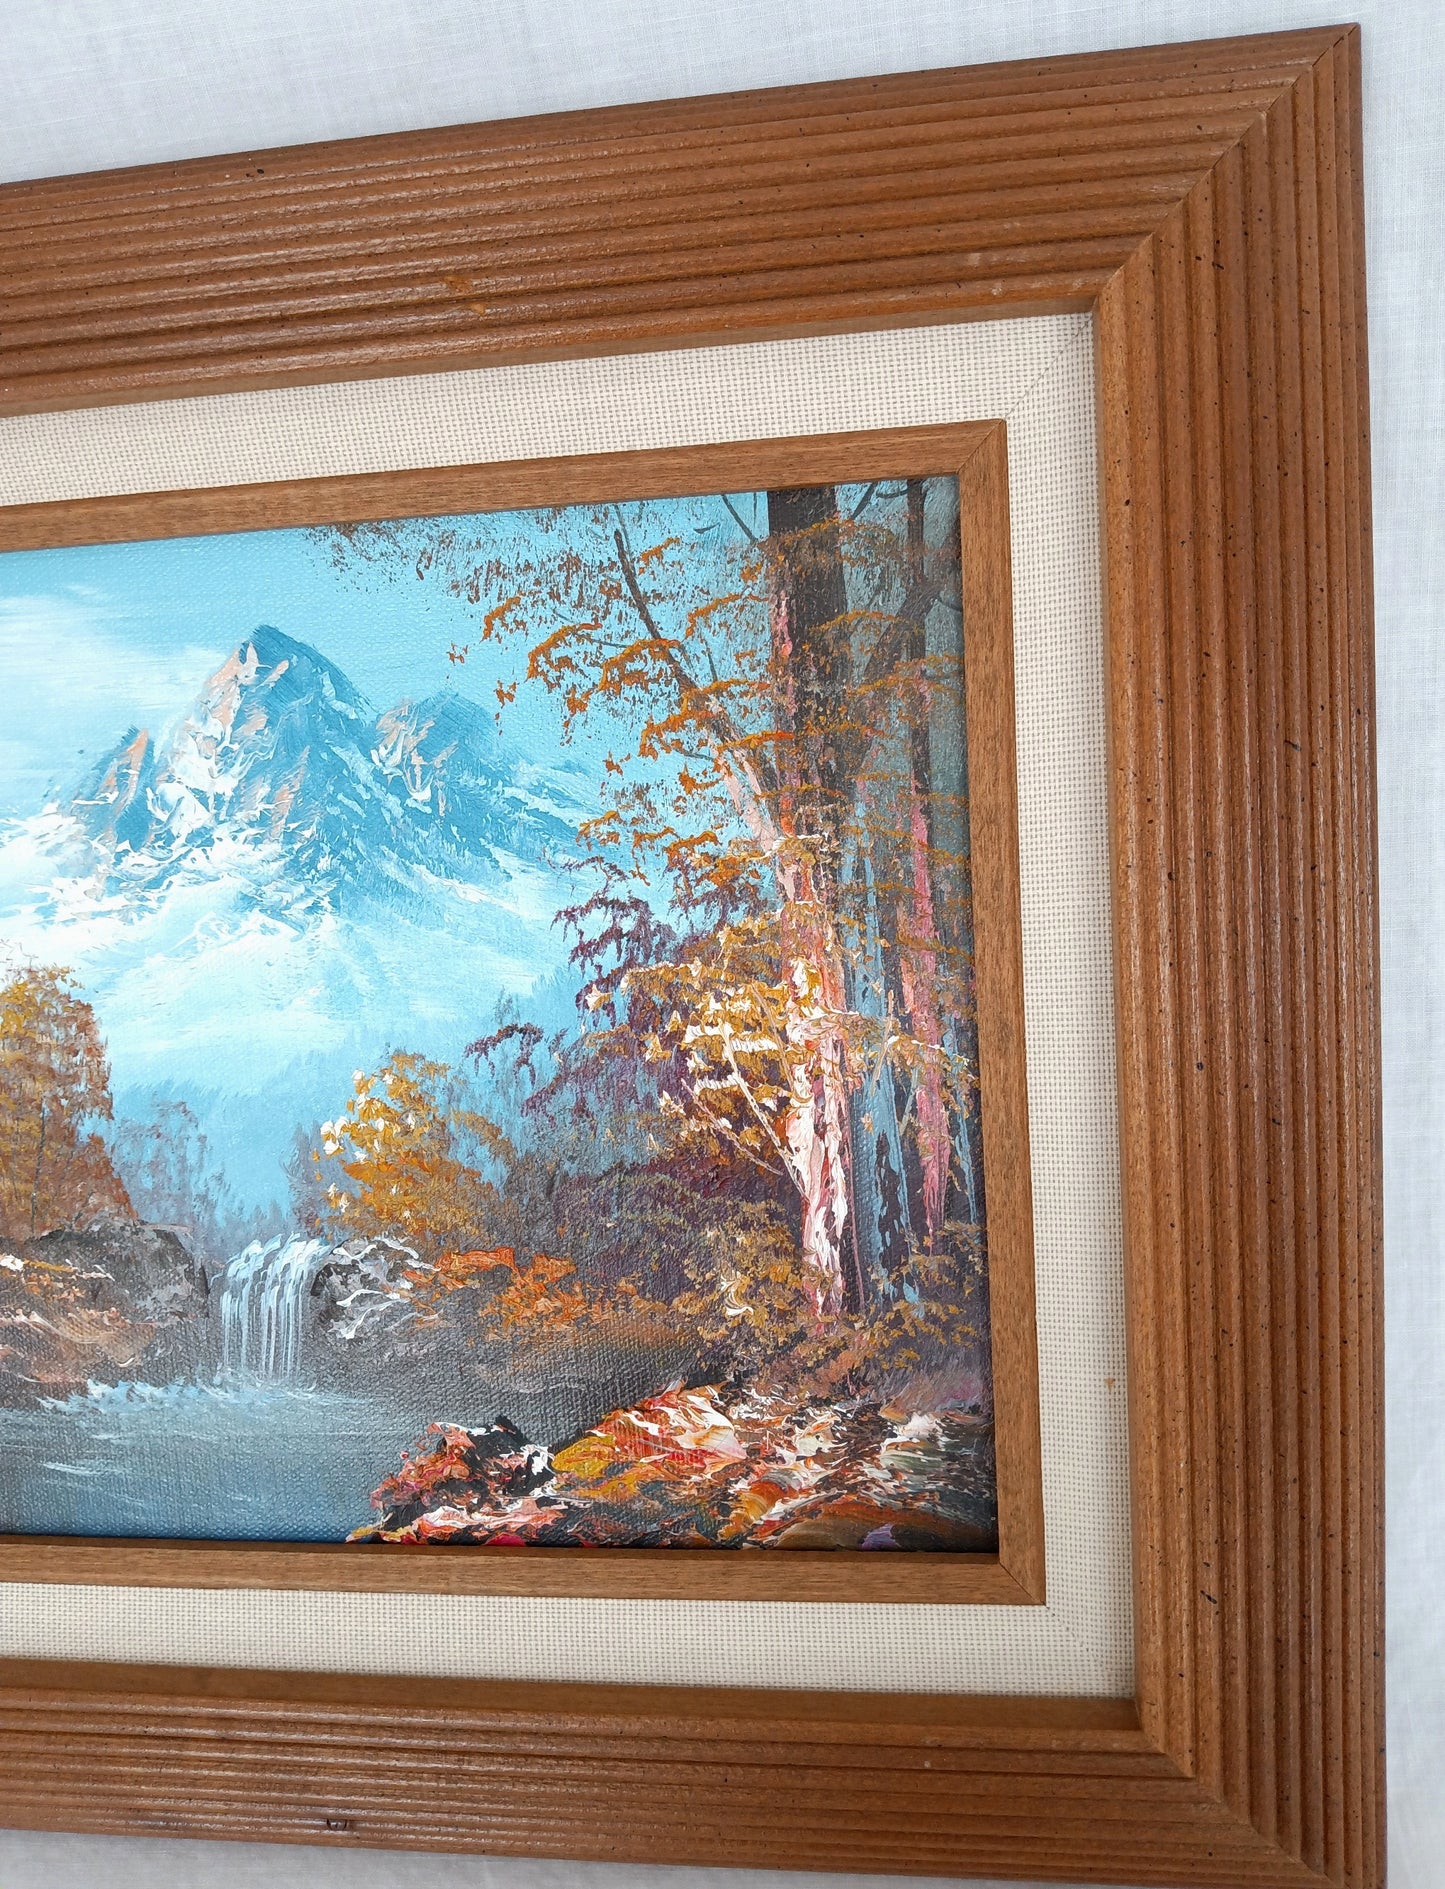 Vintage Oil Painting on Canvas Autumn Fall Mountain Scene Waterfall Landscape Wooden Frame Artwork Painting Wall Art Signed by Artist